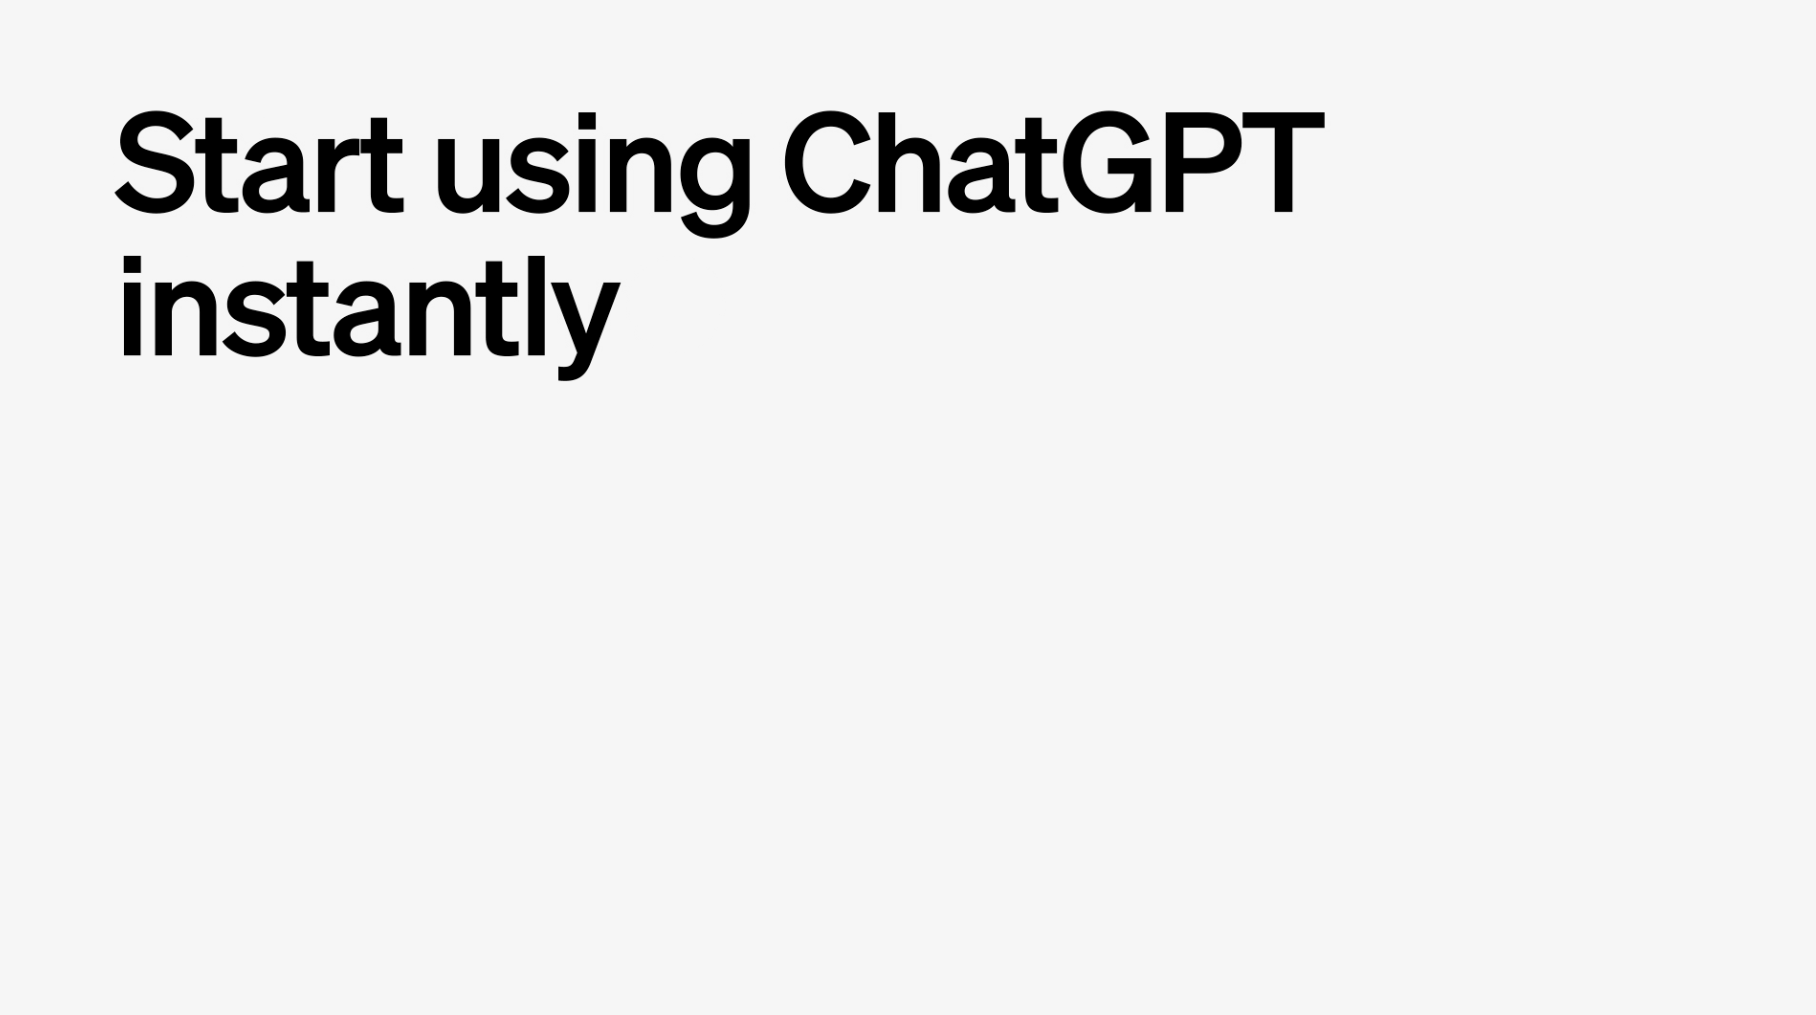 You no longer need to register to use ChatGPT, but there are some limitations